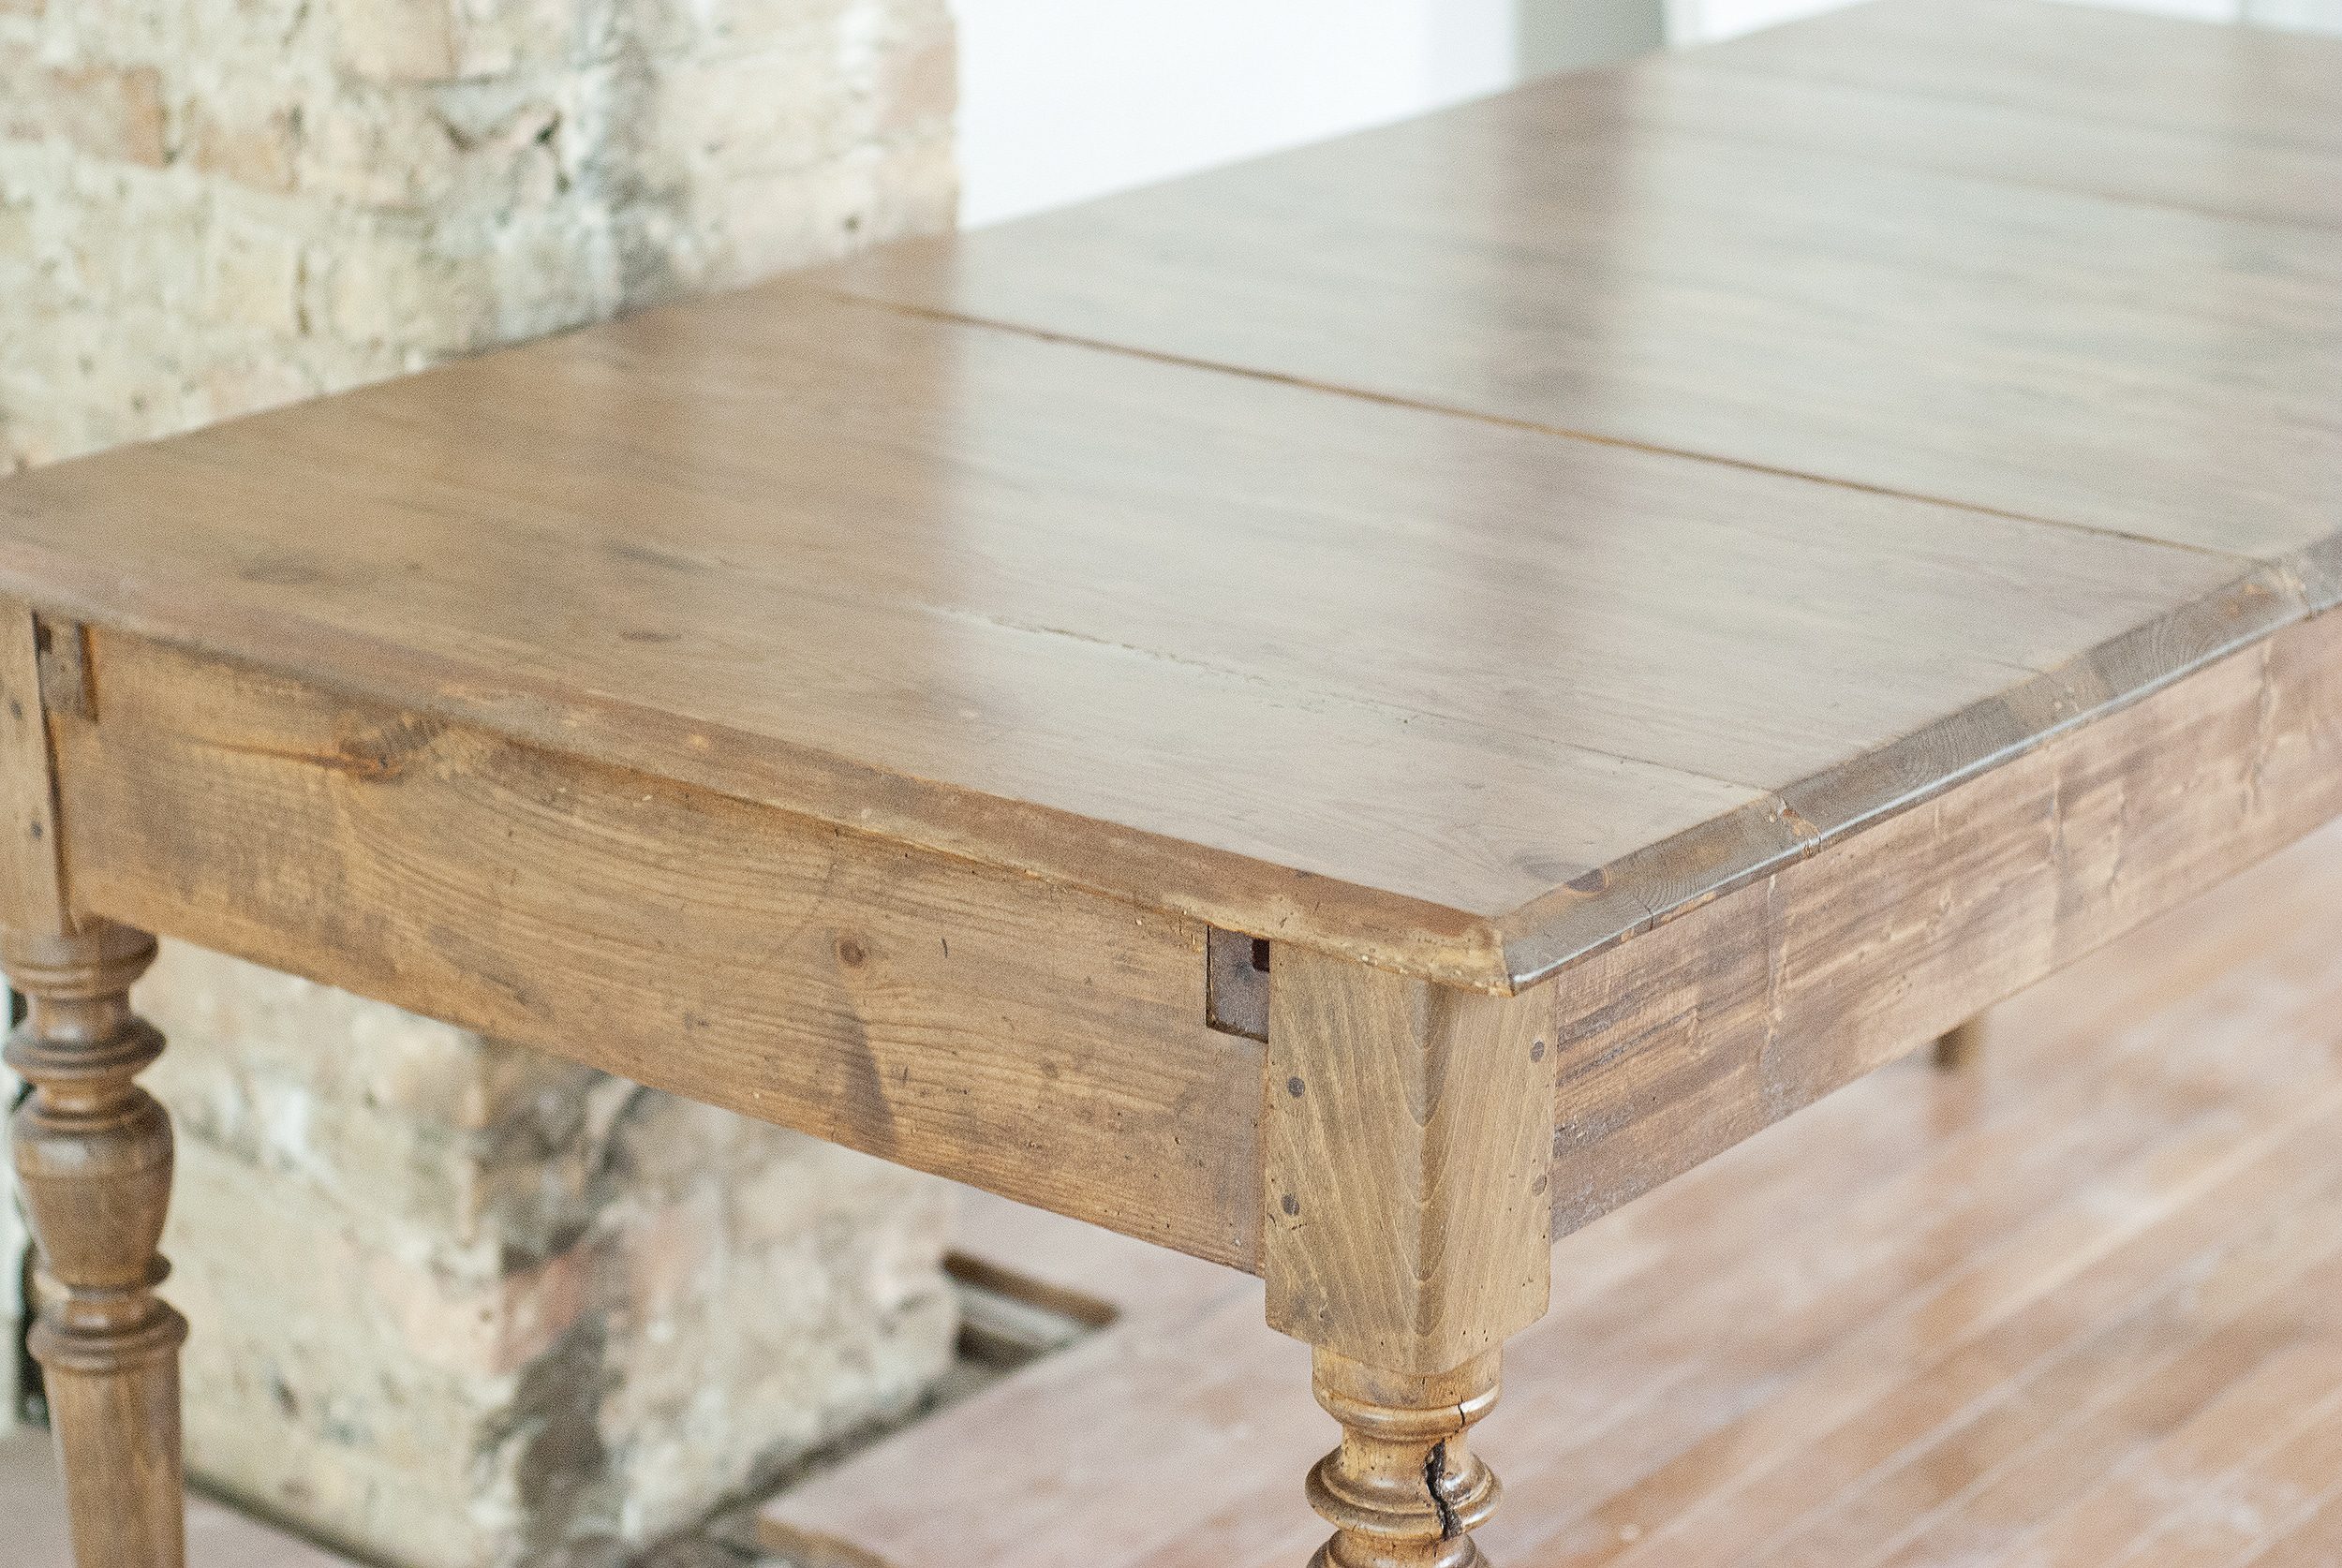 The fully rebuilt and refinished table // via Yellow Brick Home